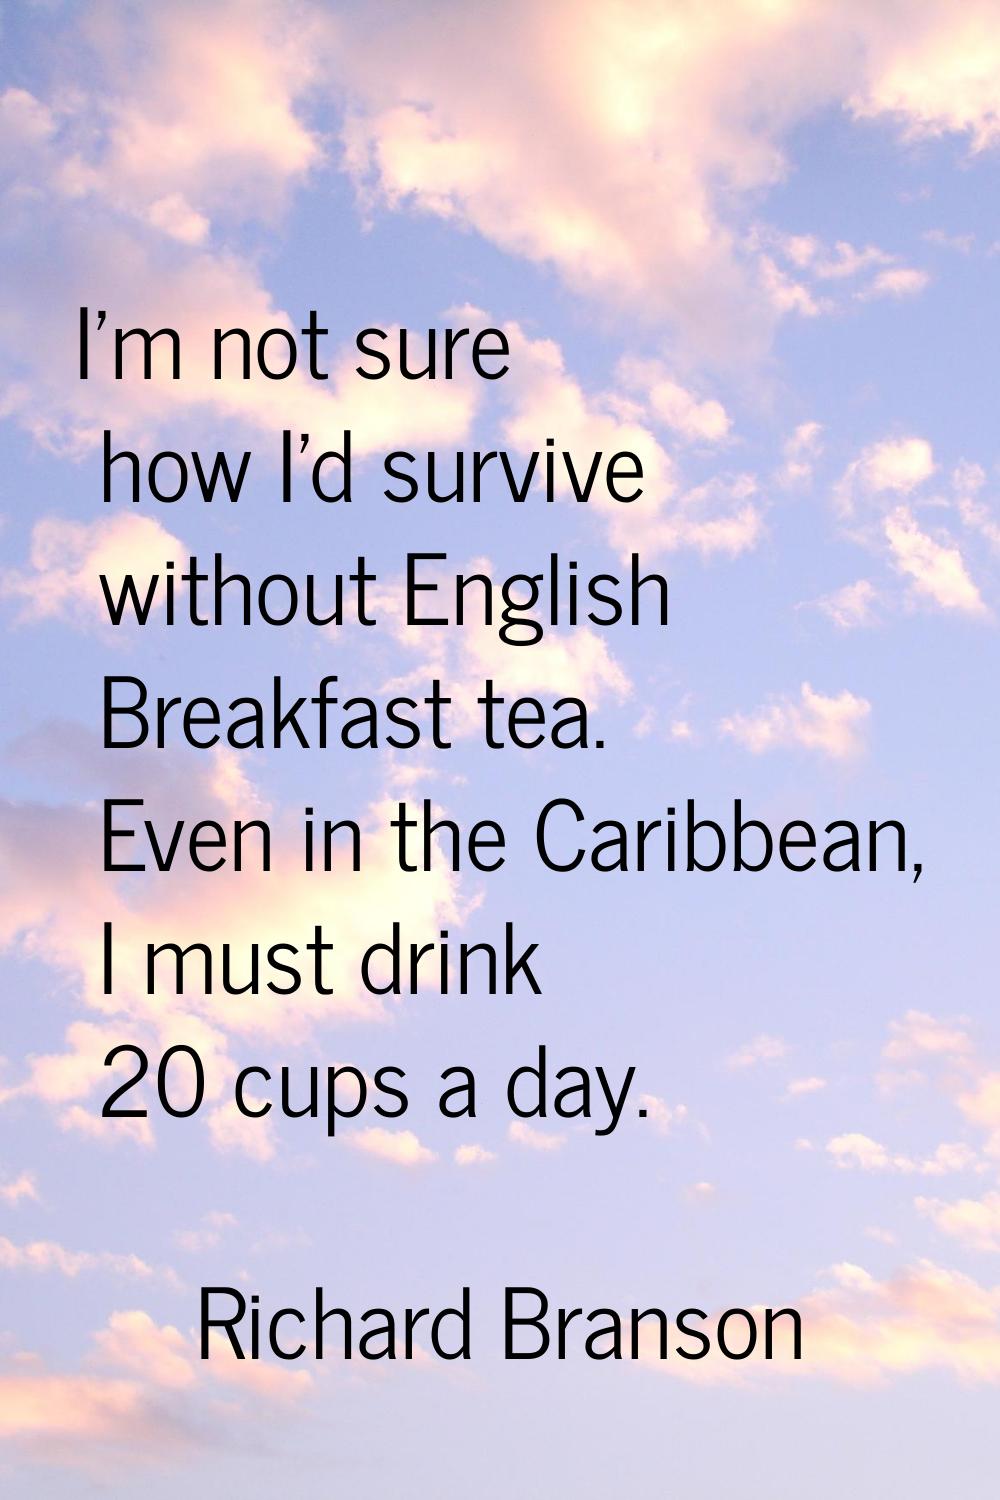 I'm not sure how I'd survive without English Breakfast tea. Even in the Caribbean, I must drink 20 